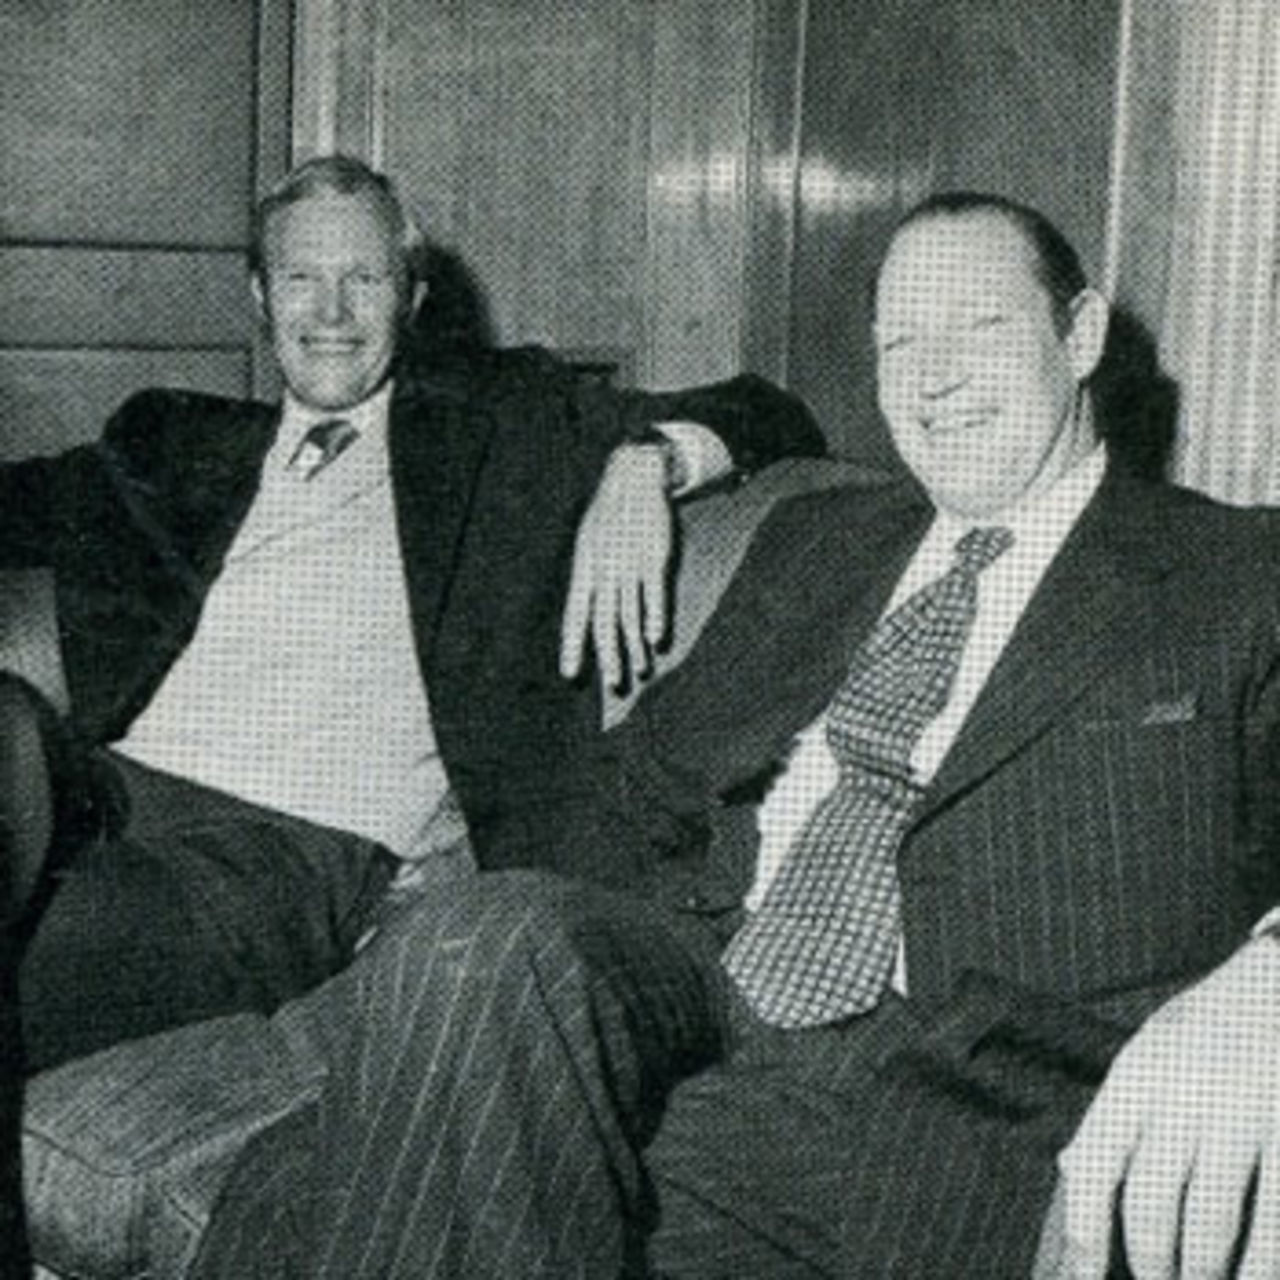 Tony Greig and Kerry Packer relax at the Dorchester, London, June 2, 1977